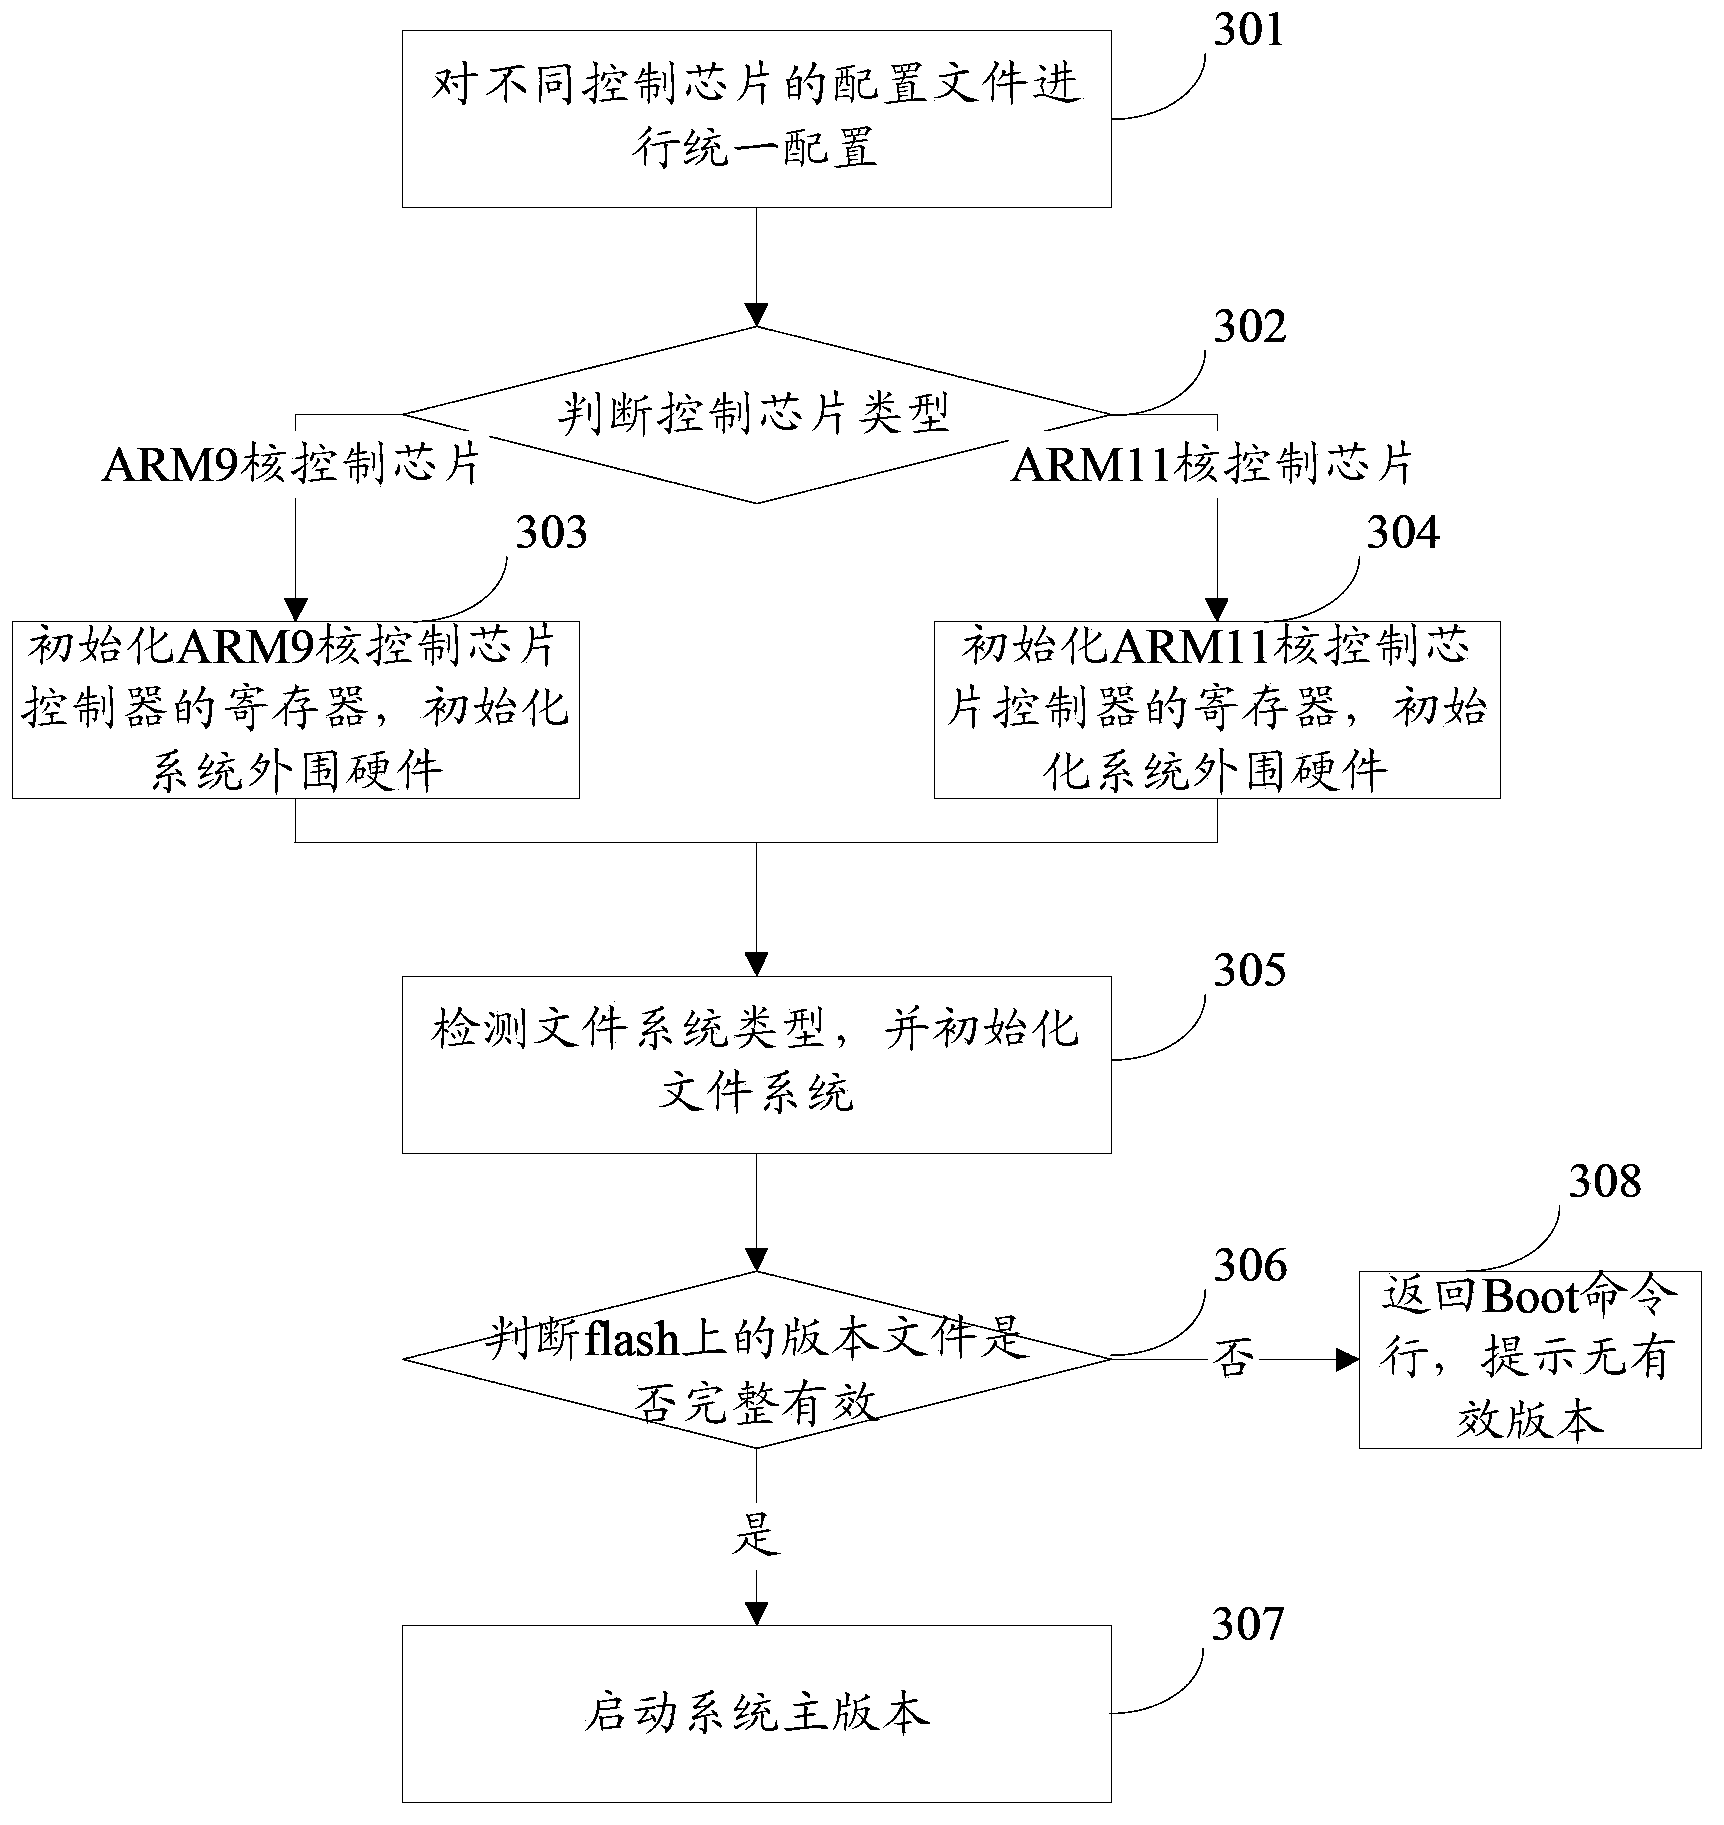 Design method for binary system unified Boot programs and kernel programs